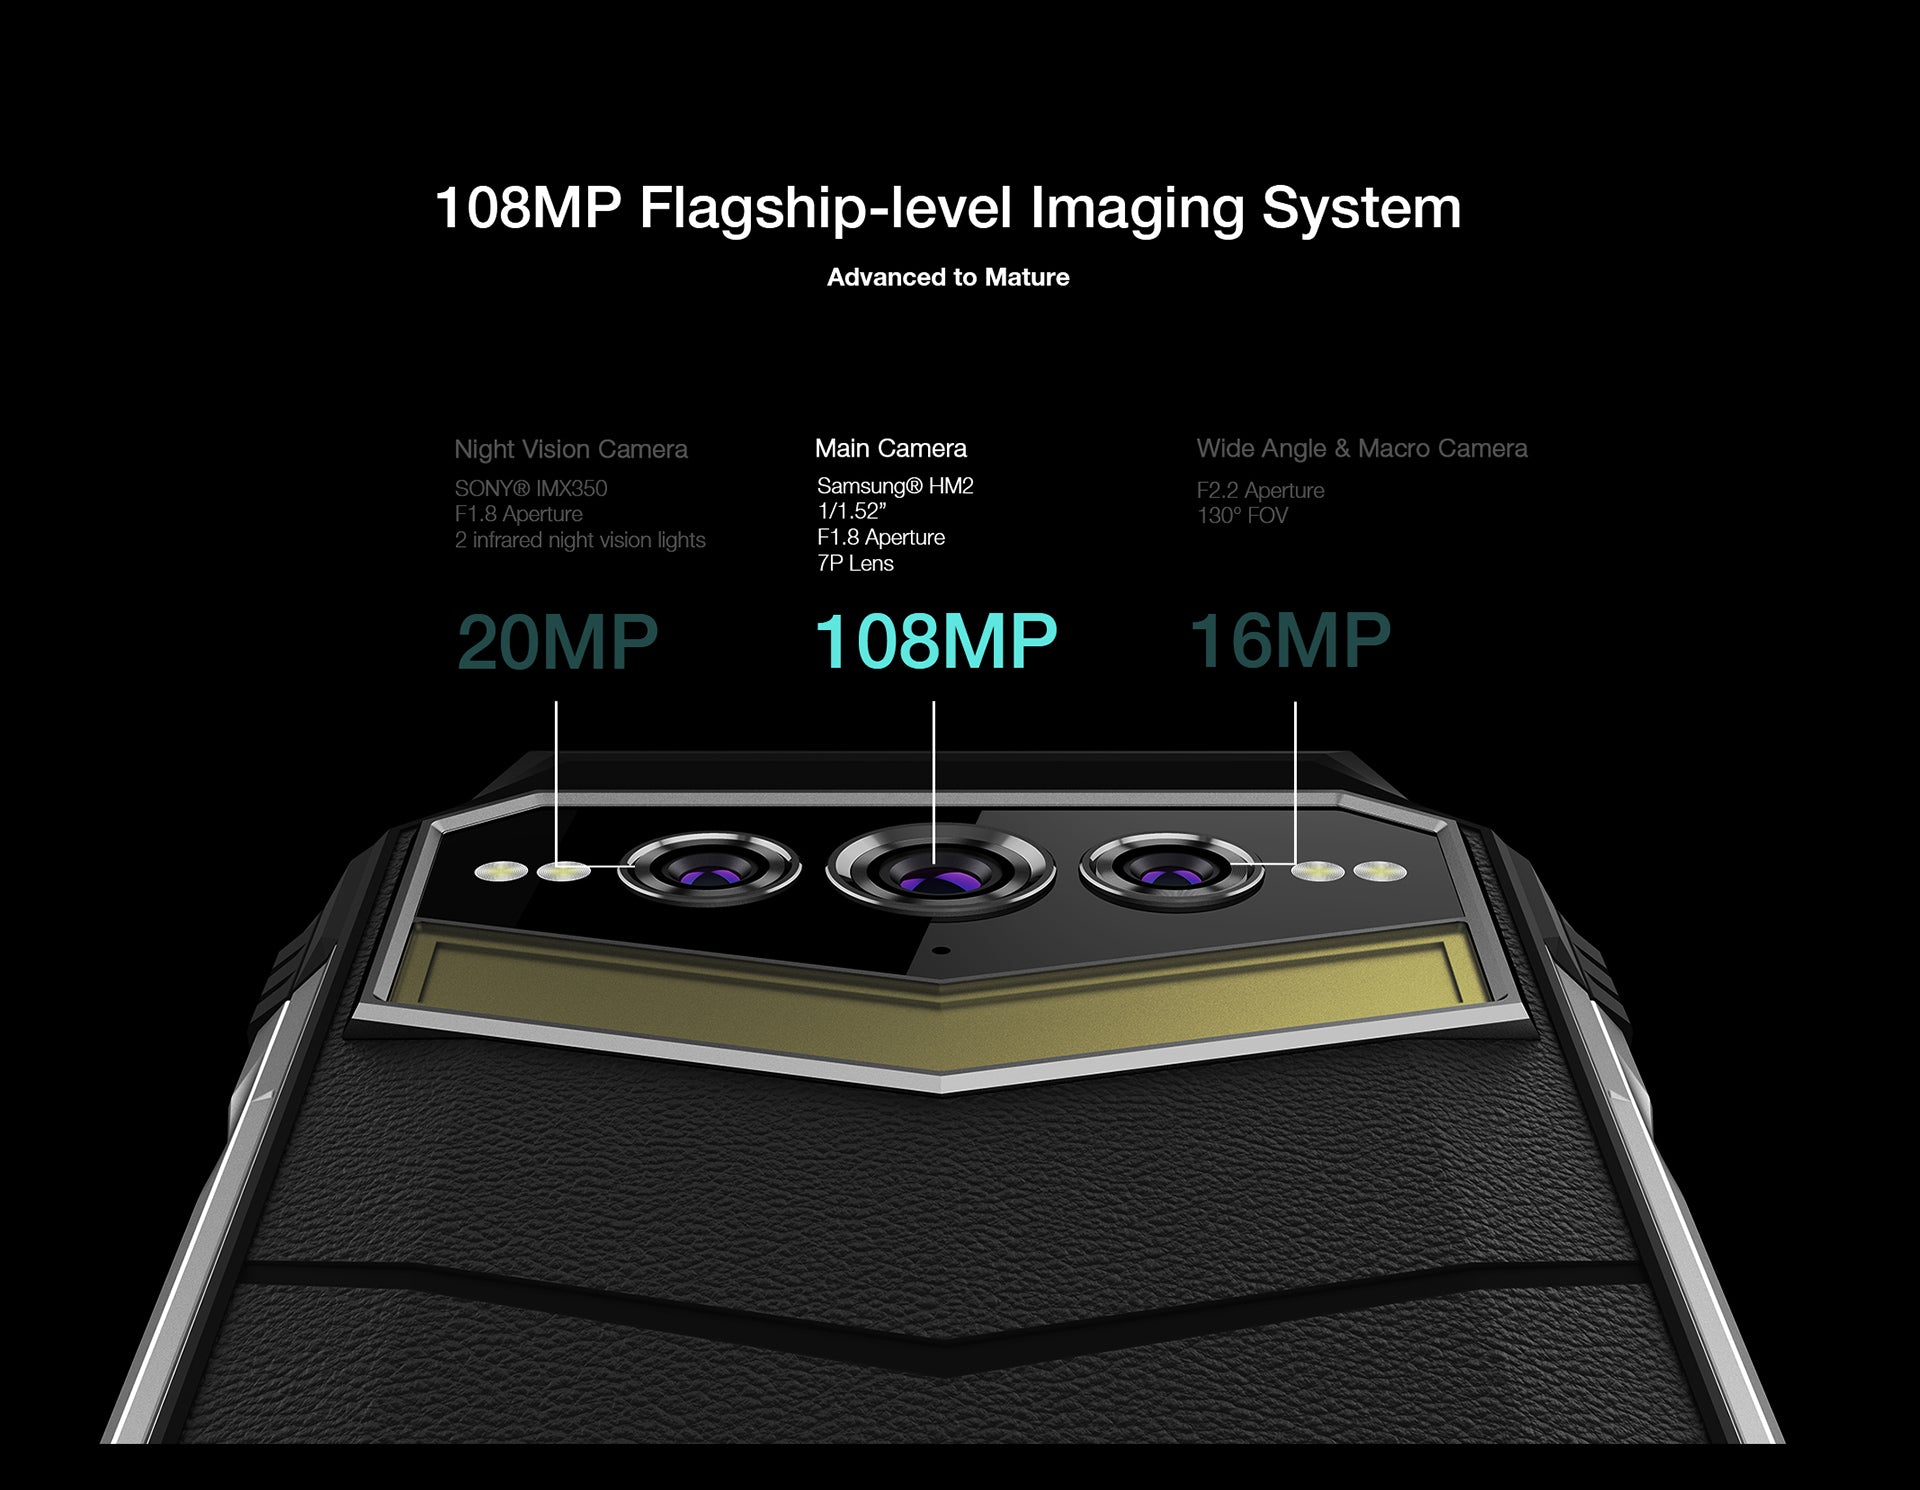 Doogee S100 Pro price, specs, release date and leaks